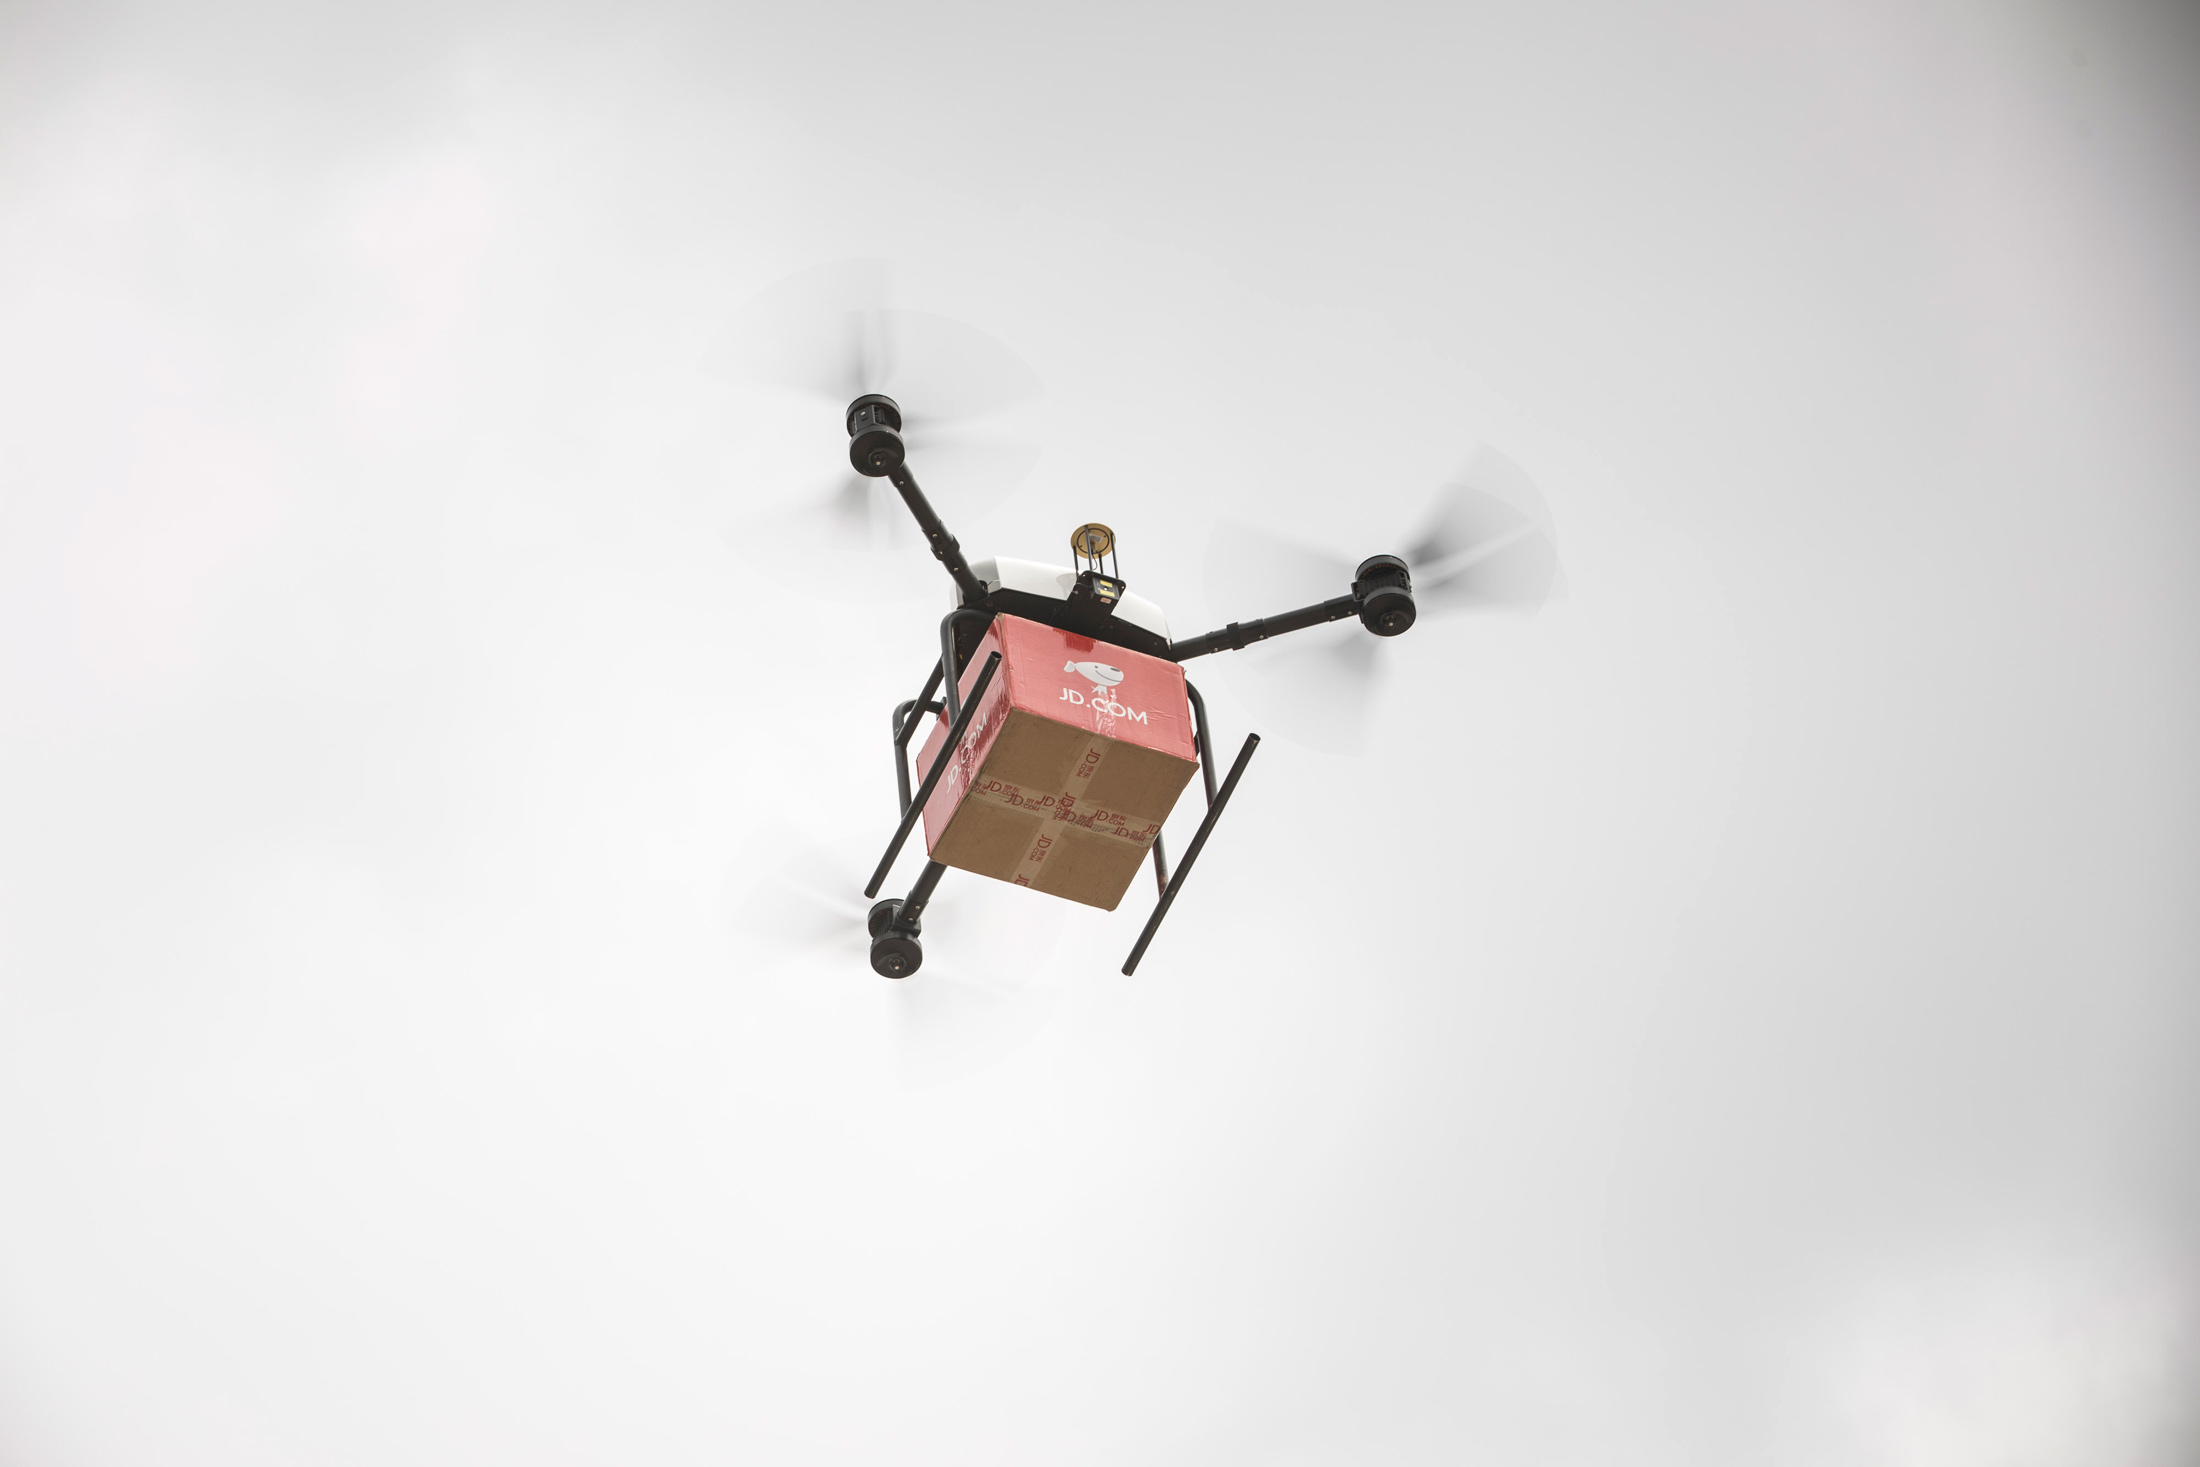 China's DJI launches first delivery drone globally as regulatory shift  spurs competition